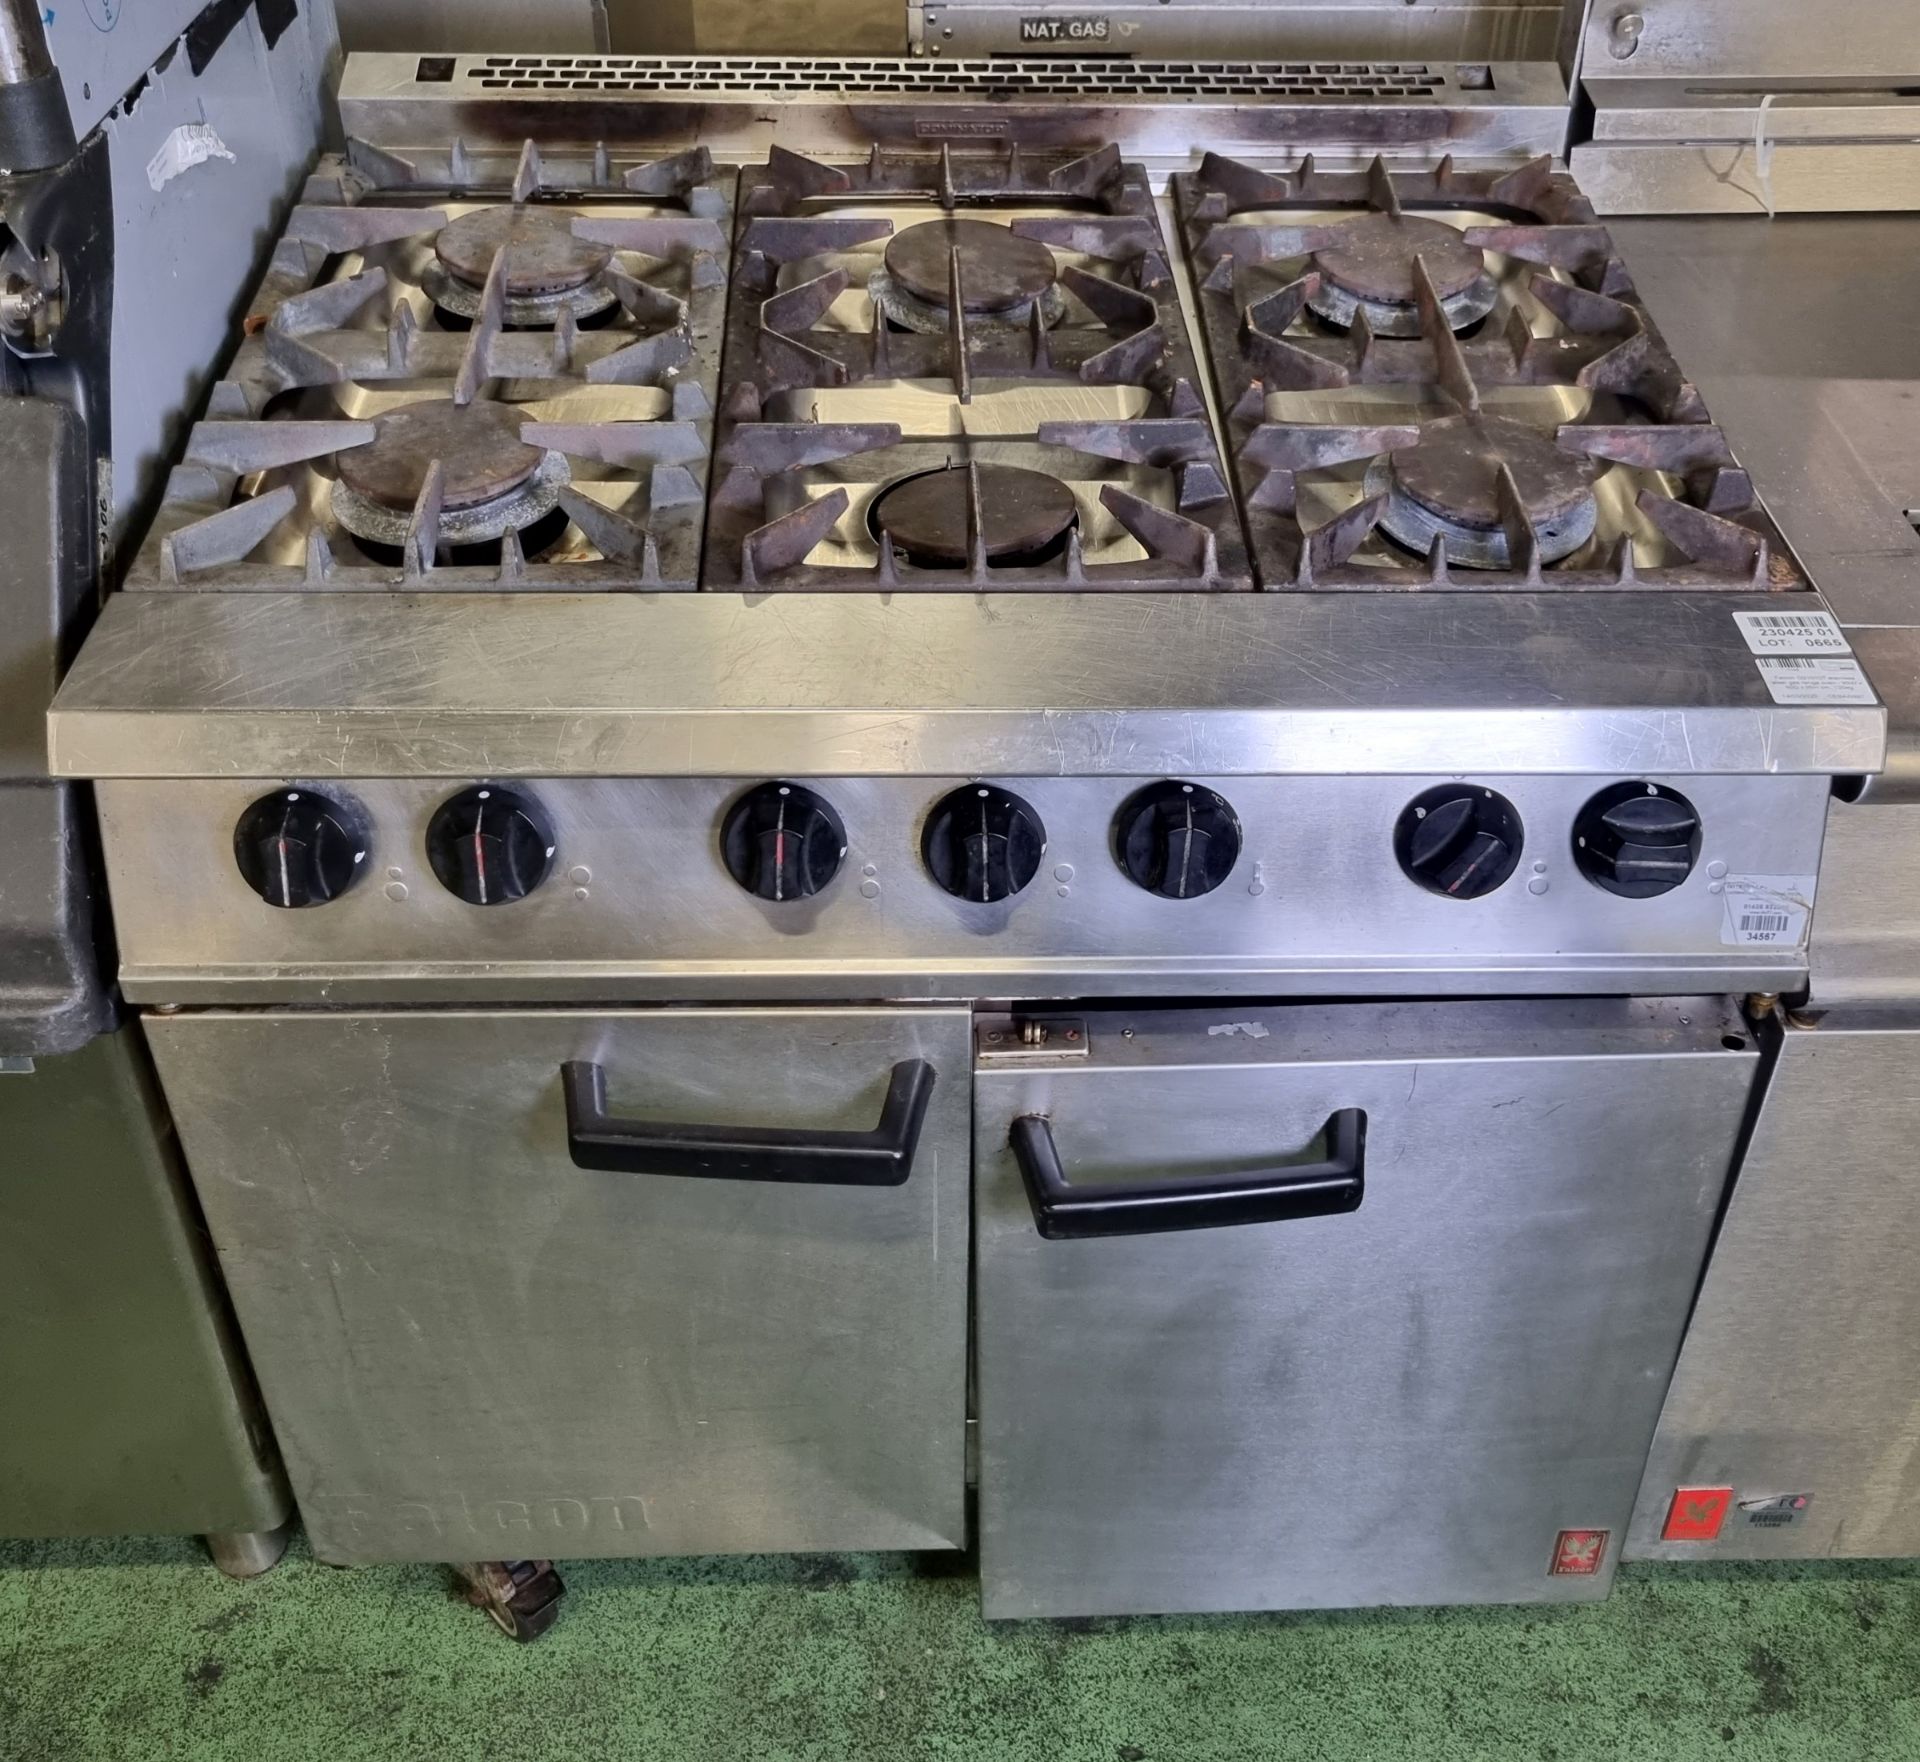 Falcon G21010T stainless steel gas range oven - W 90 x D 80 x H 95 cm, 120kg - Image 2 of 5